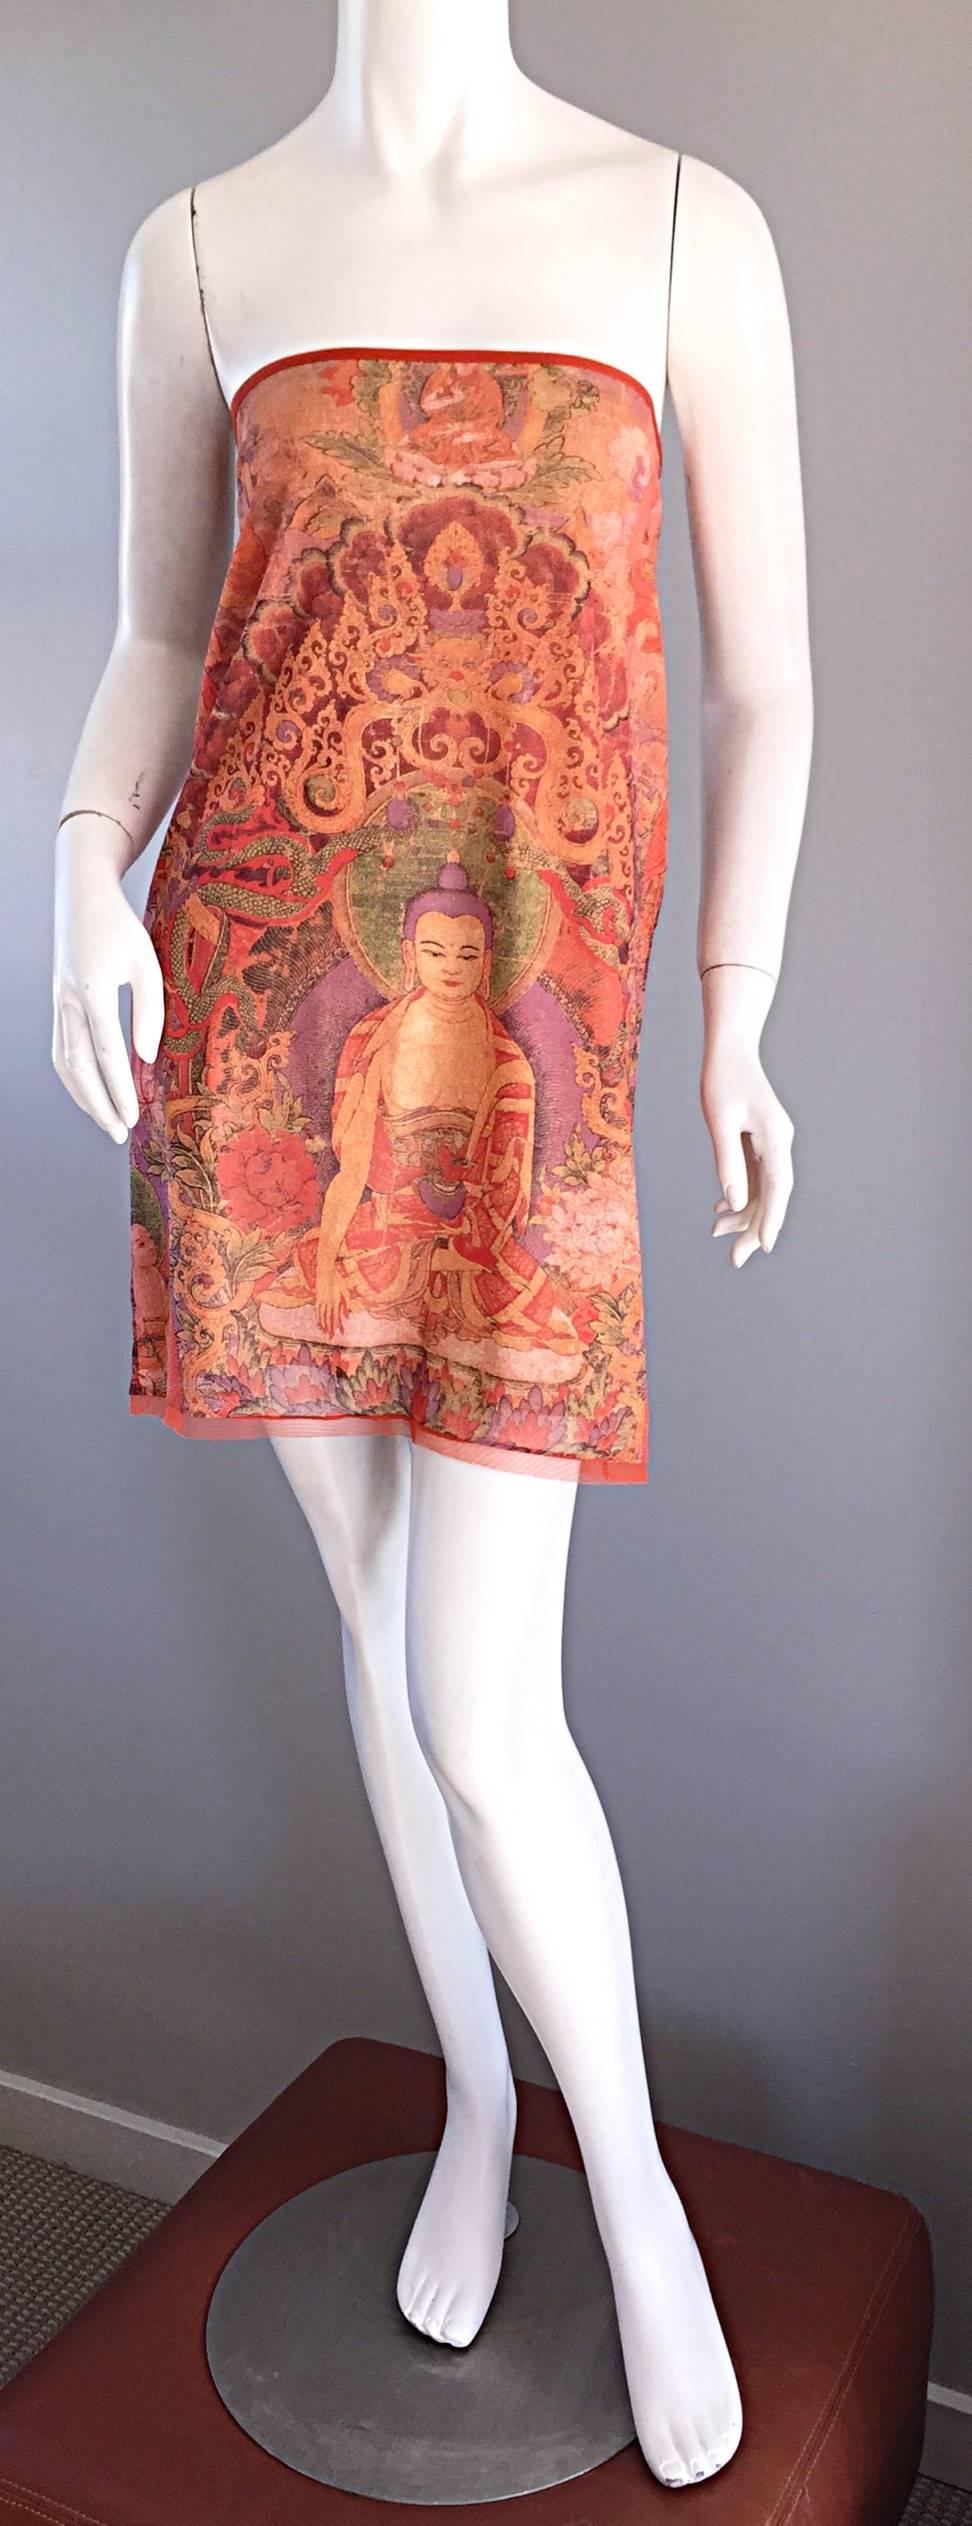 Super rare vintage VIVIENNE TAM skirt and blouse from the coveted 'Buddha' Collection. Looks great together, yet perfect as separates! Skirt works great as a  tube dress! Keyhole detail at bust to accommodate a variety of bust sizes. A true piece of